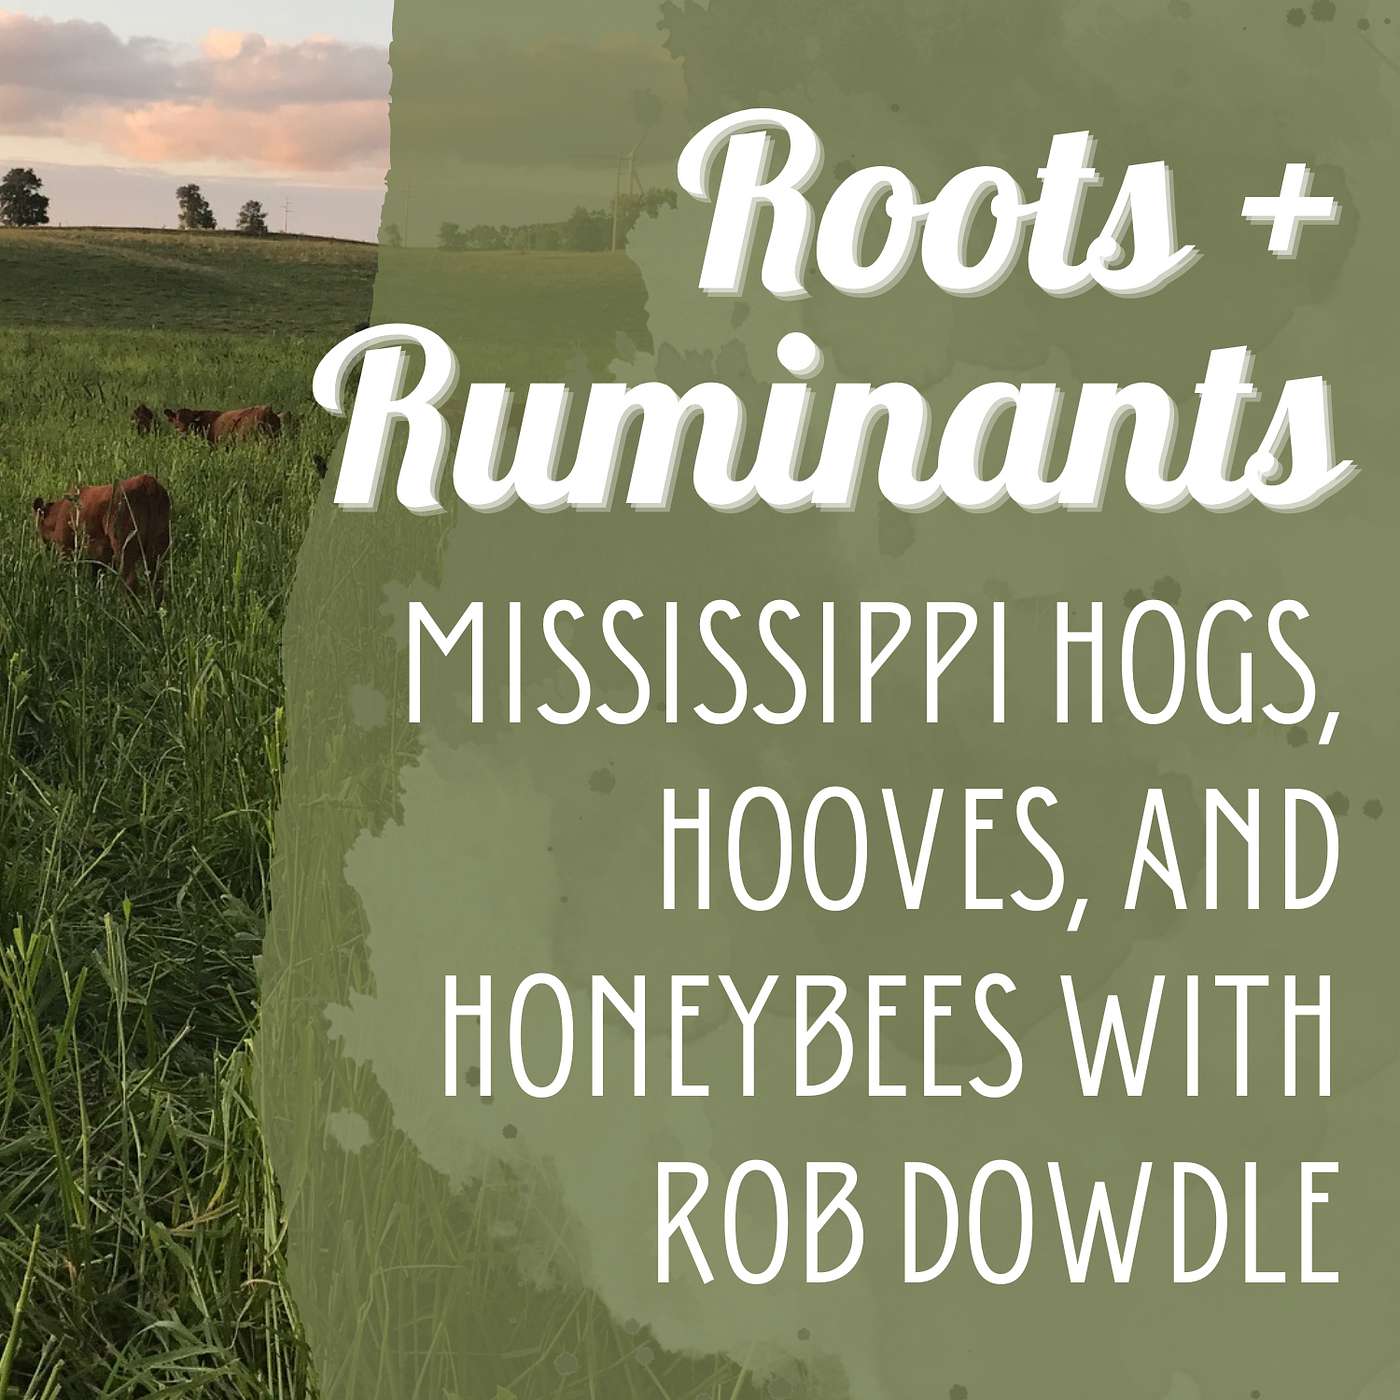 Mississippi hogs, hooves, and honeybees with Rob Dowdle cover art